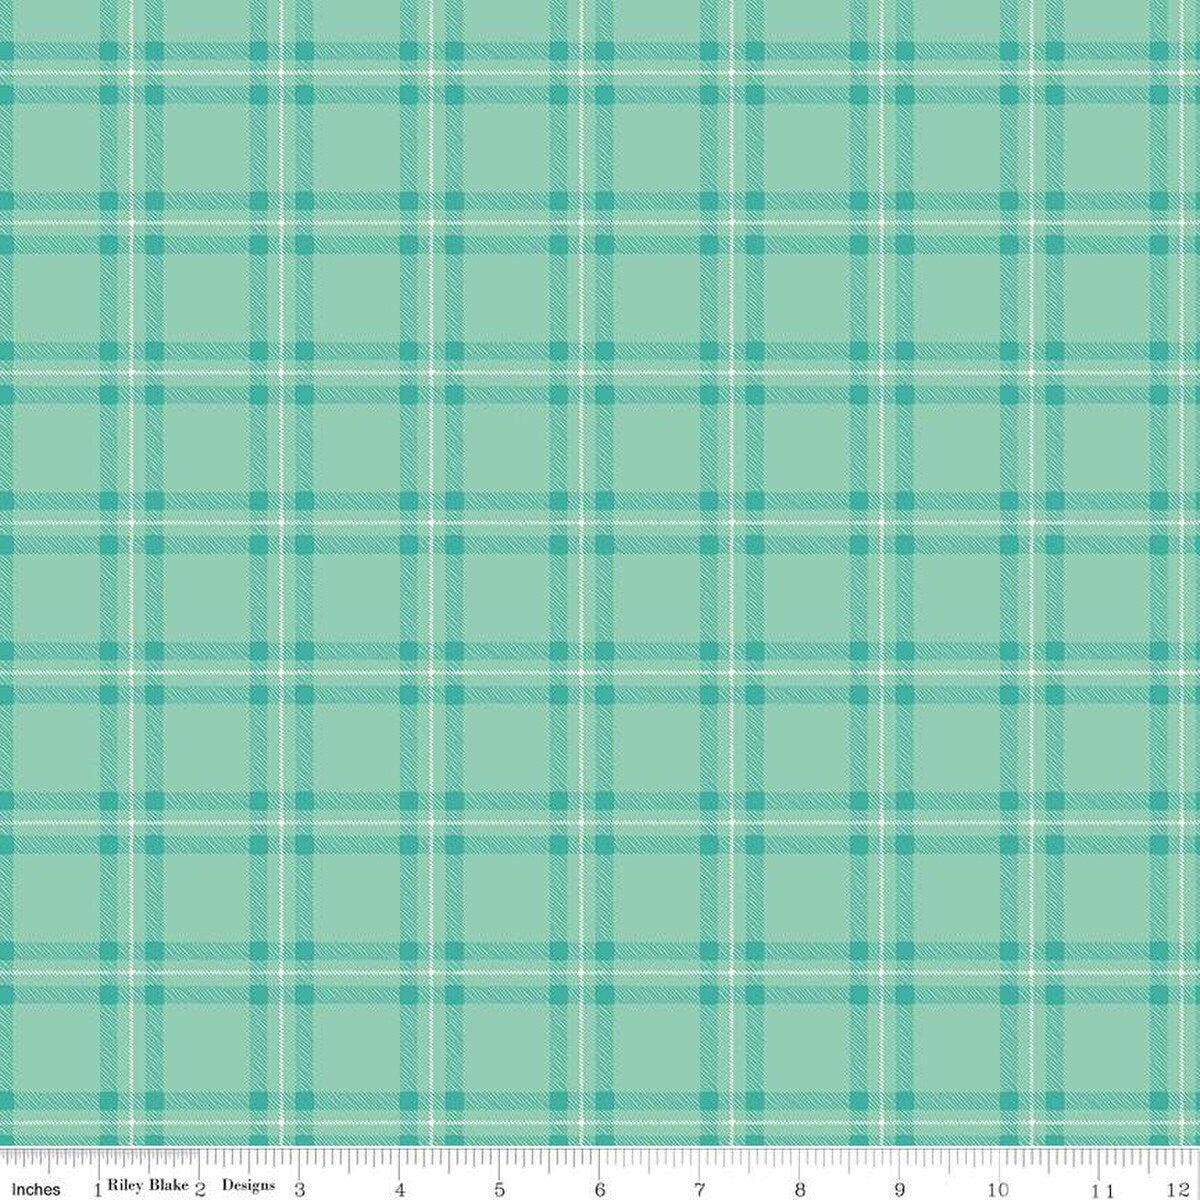 Teal Plaid Fabric by the yard - My Mind's Eye for Riley Blake - 100% cotton fabric - Check material check print plaid check - SHIPS NEXT DAY